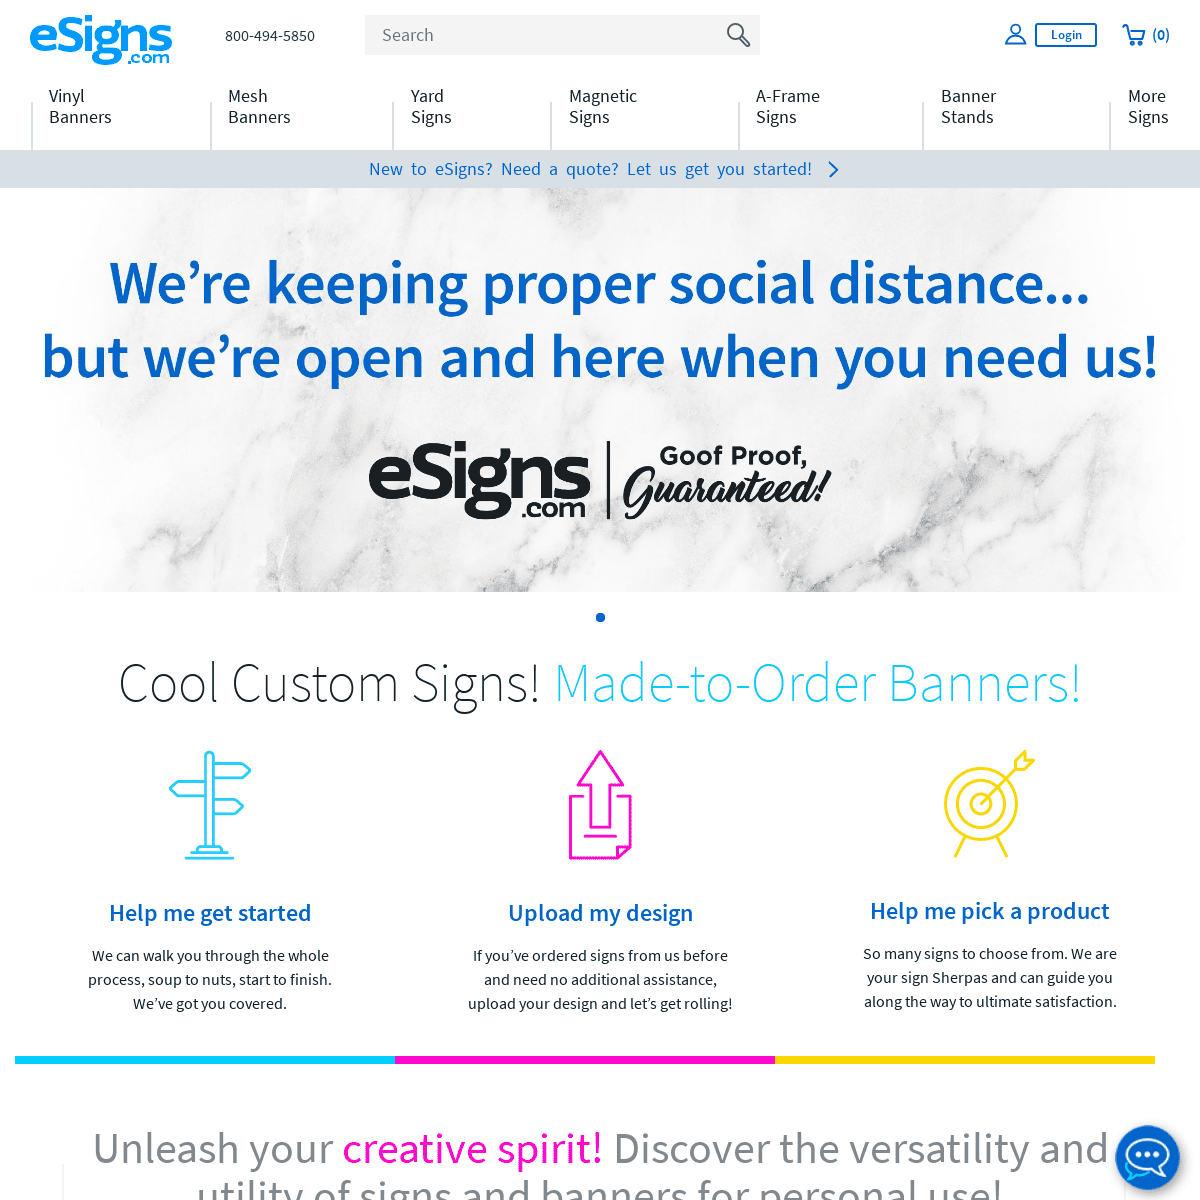 A complete backup of esigns.com